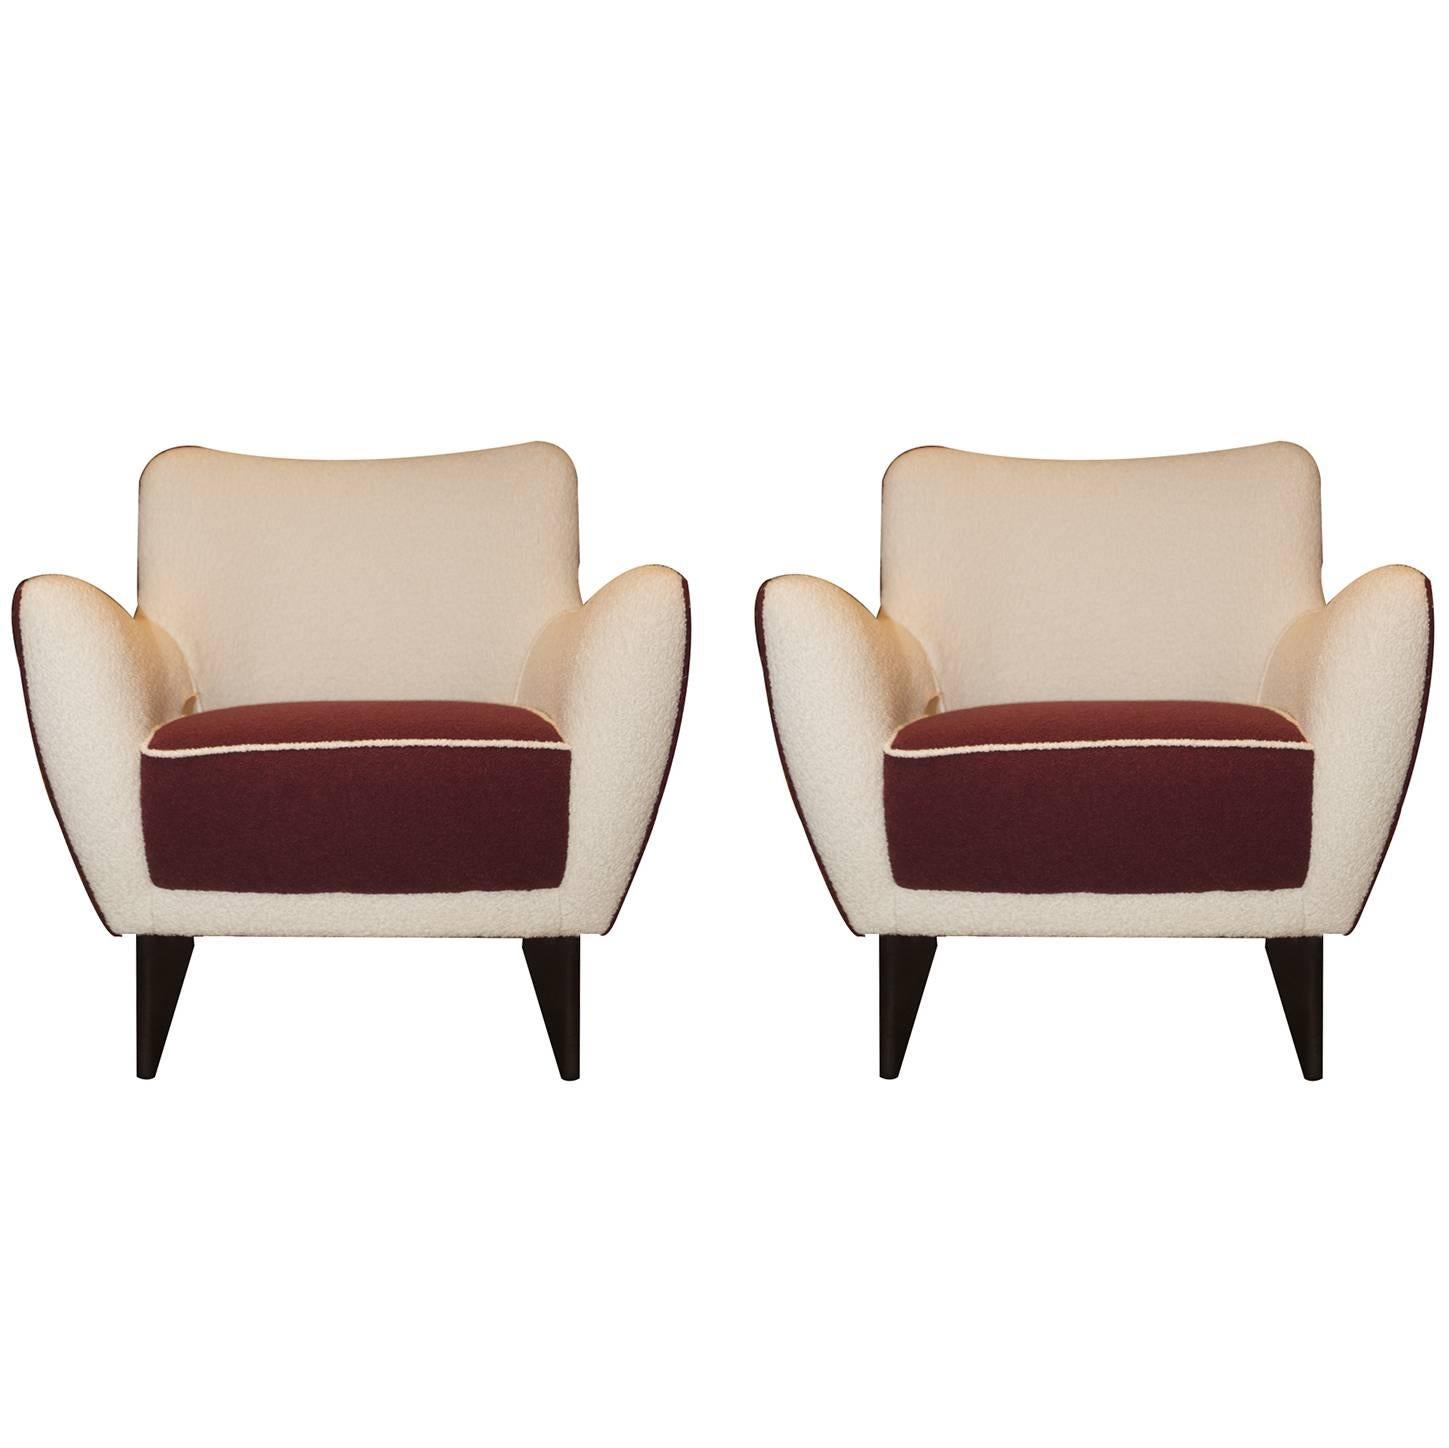 Pair of Vintage Armchairs with Matching Poufs, Veronesi, Italy, 1960s